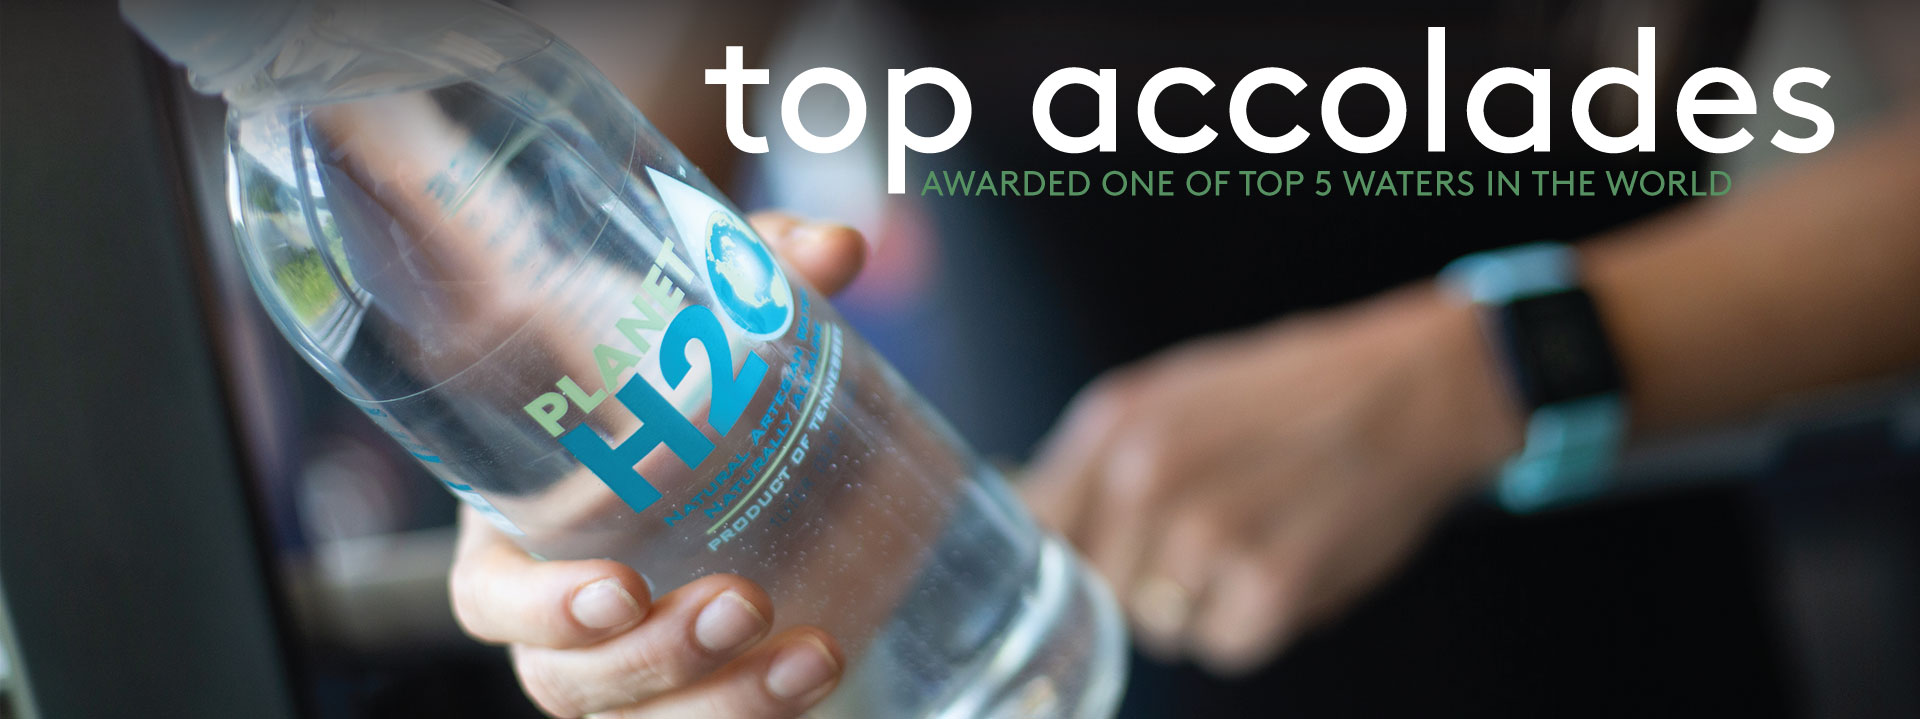 Planet H2O has been awarded one of the top 5 waters in the world